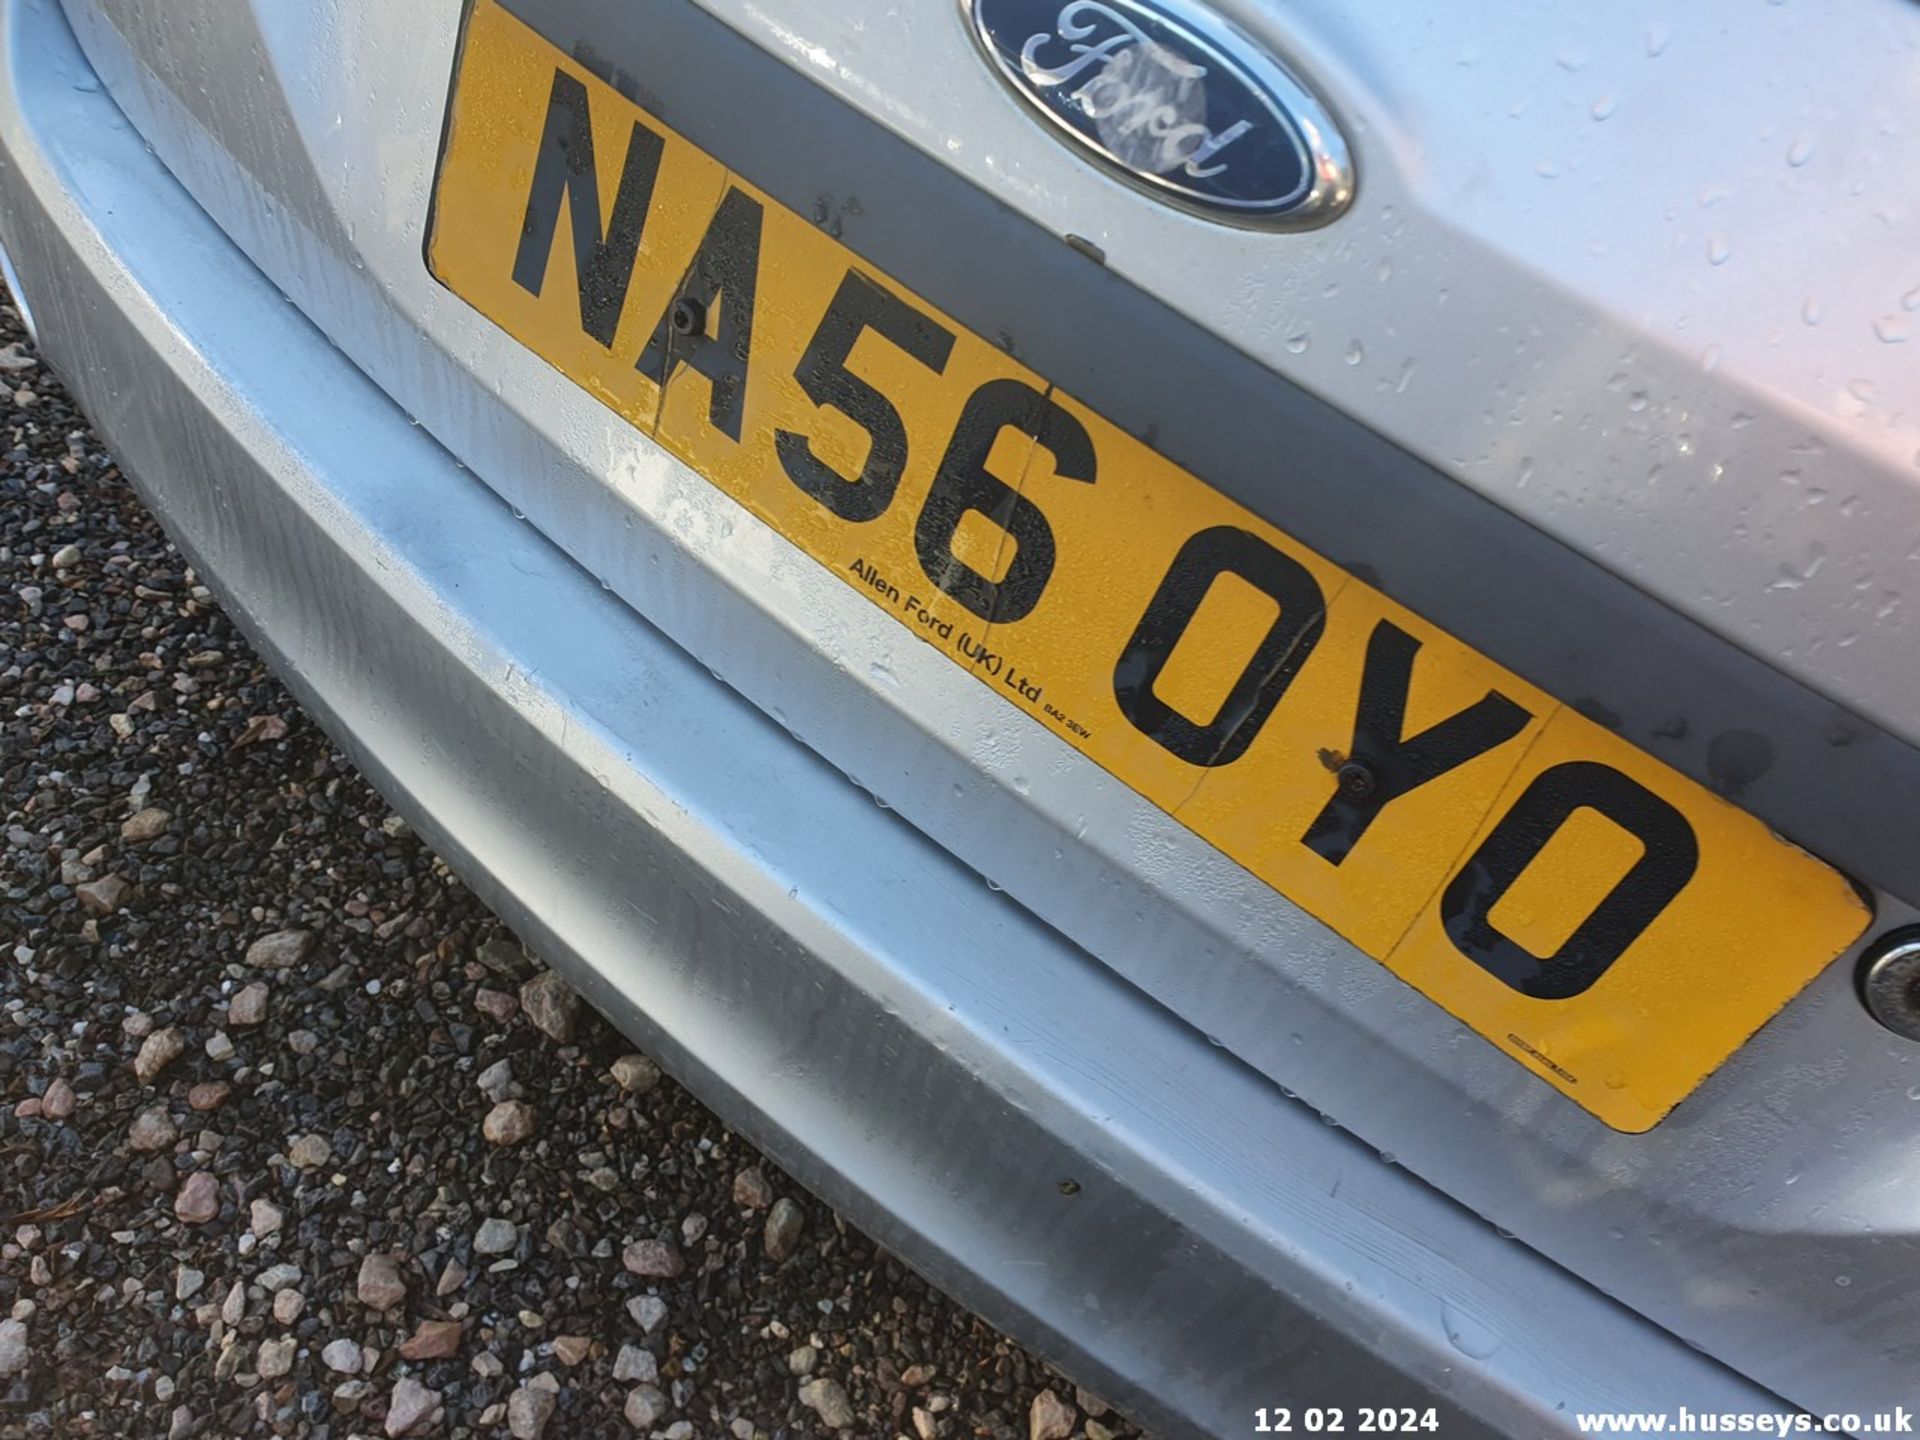 06/56 FORD FIESTA STYLE TDCI - 1399cc 5dr Hatchback (Silver) - Image 34 of 39